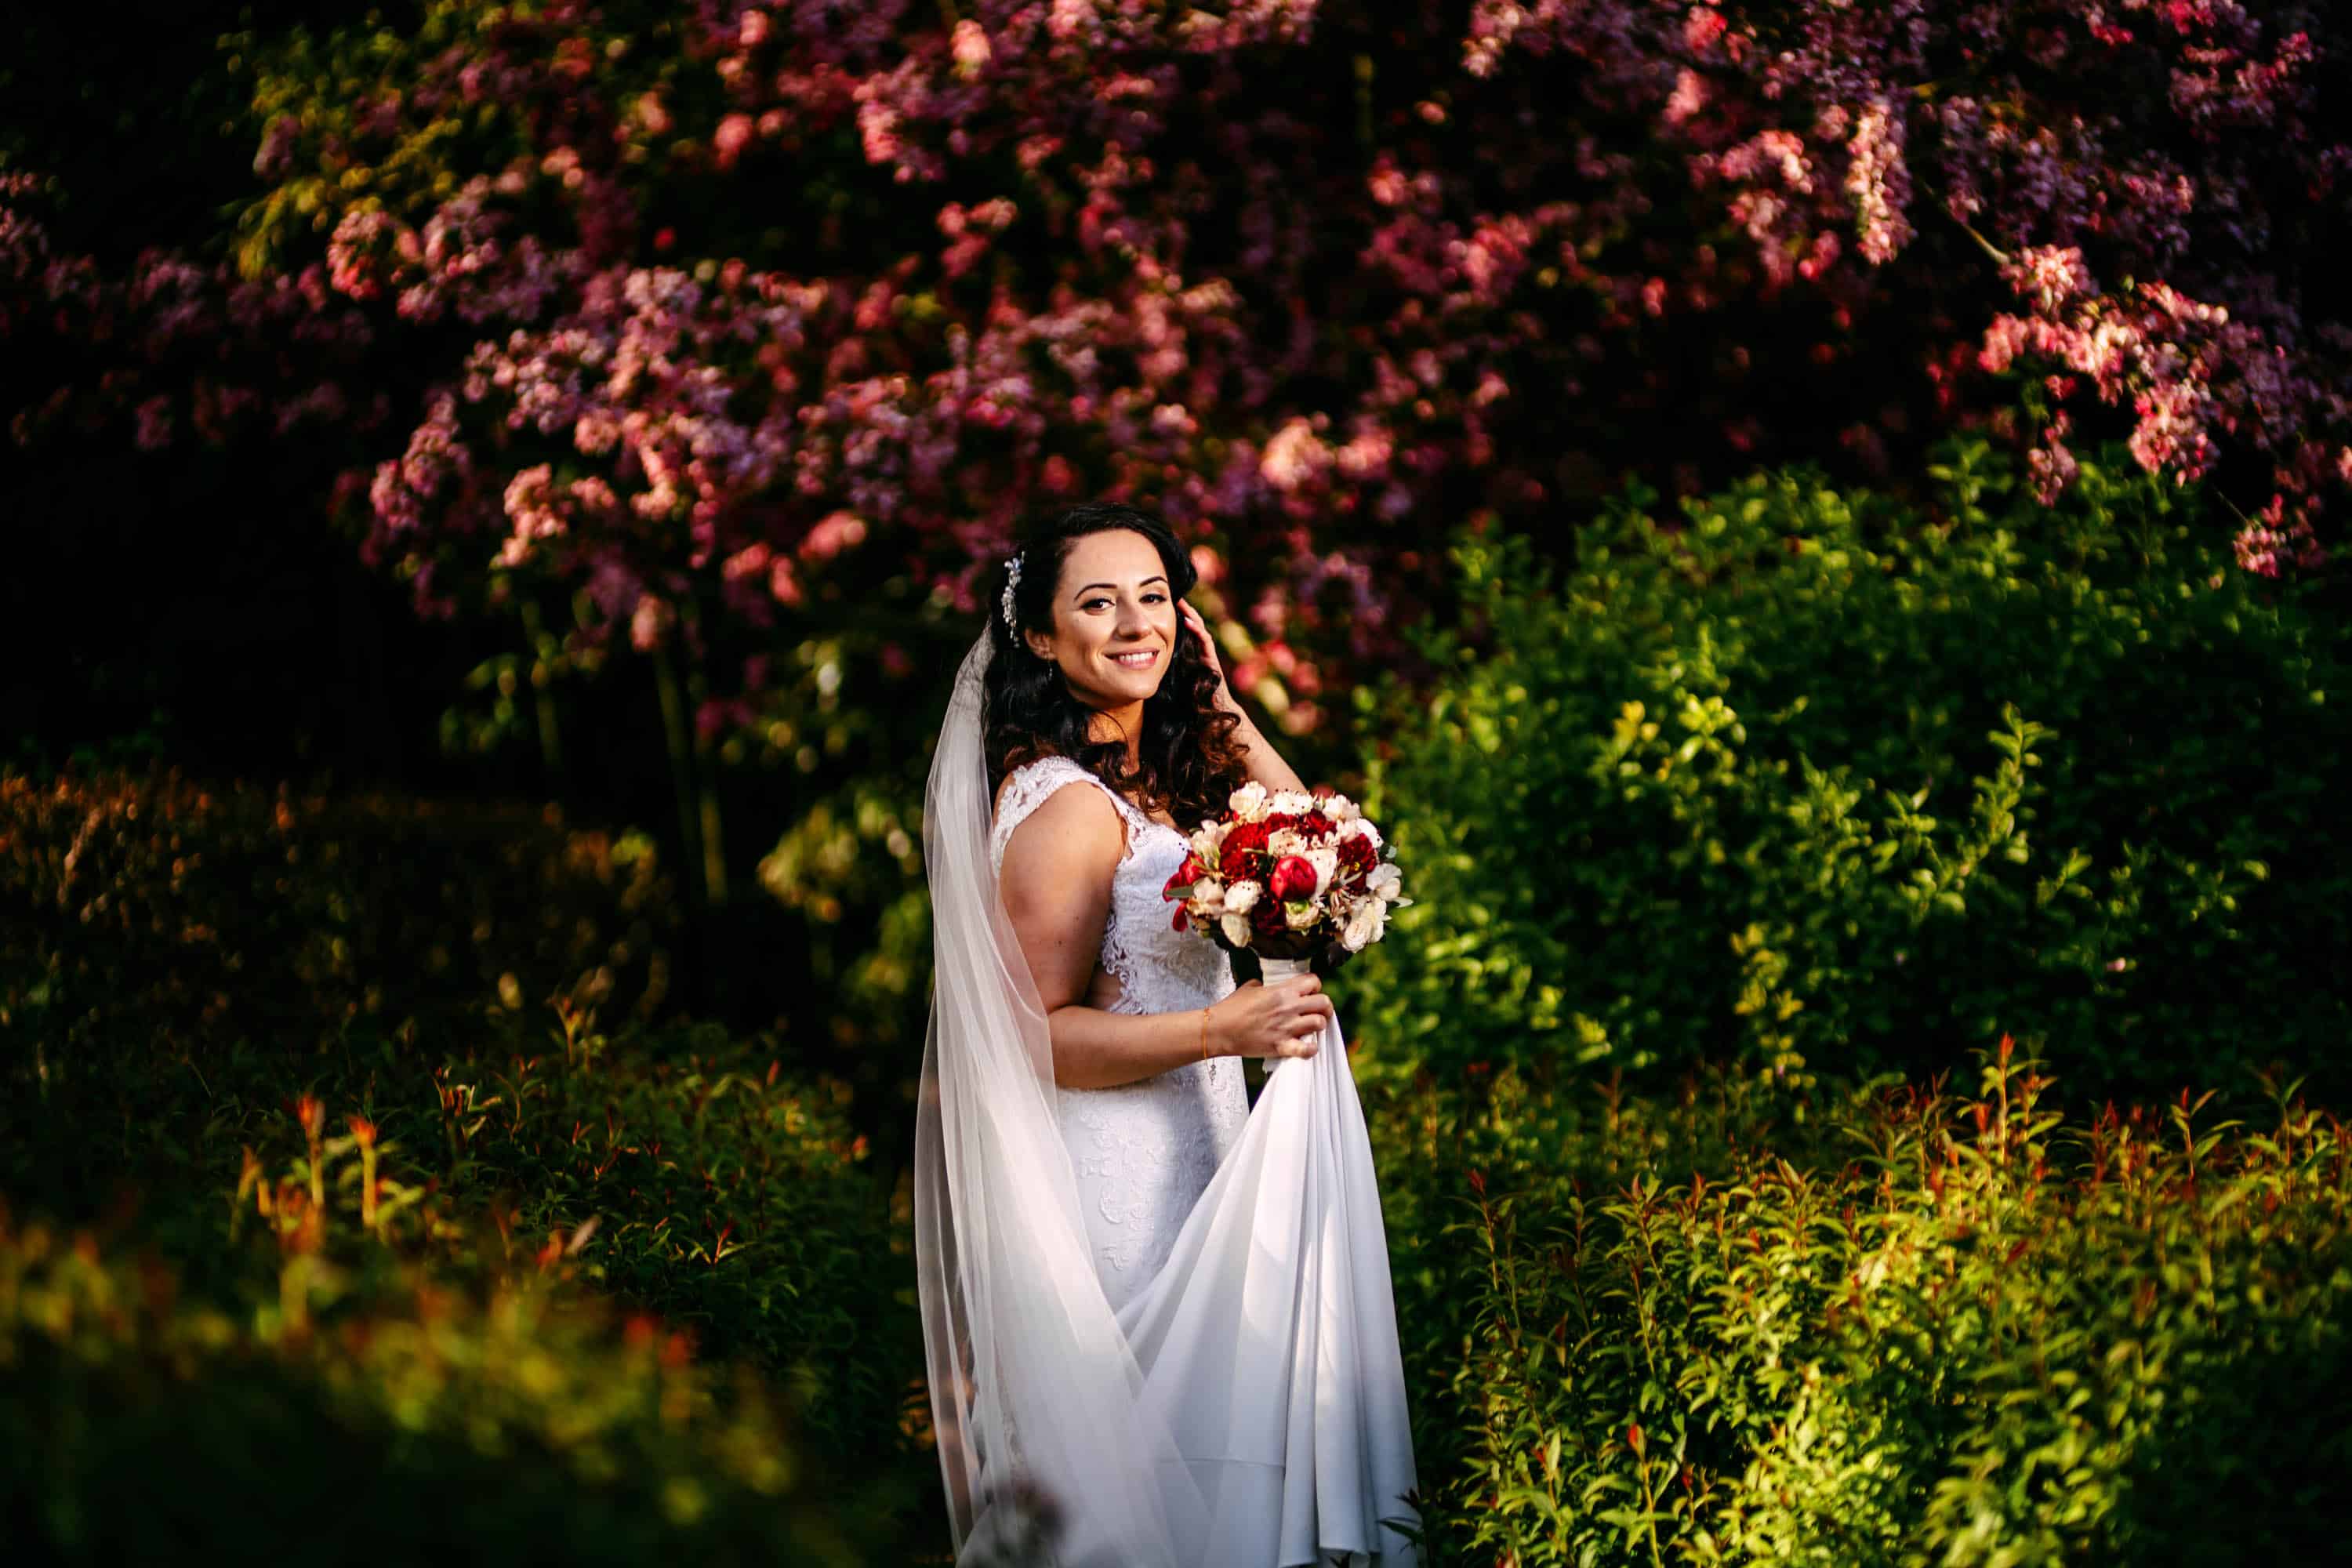 A bride in a wedding dress poses in front of a flowering tree.